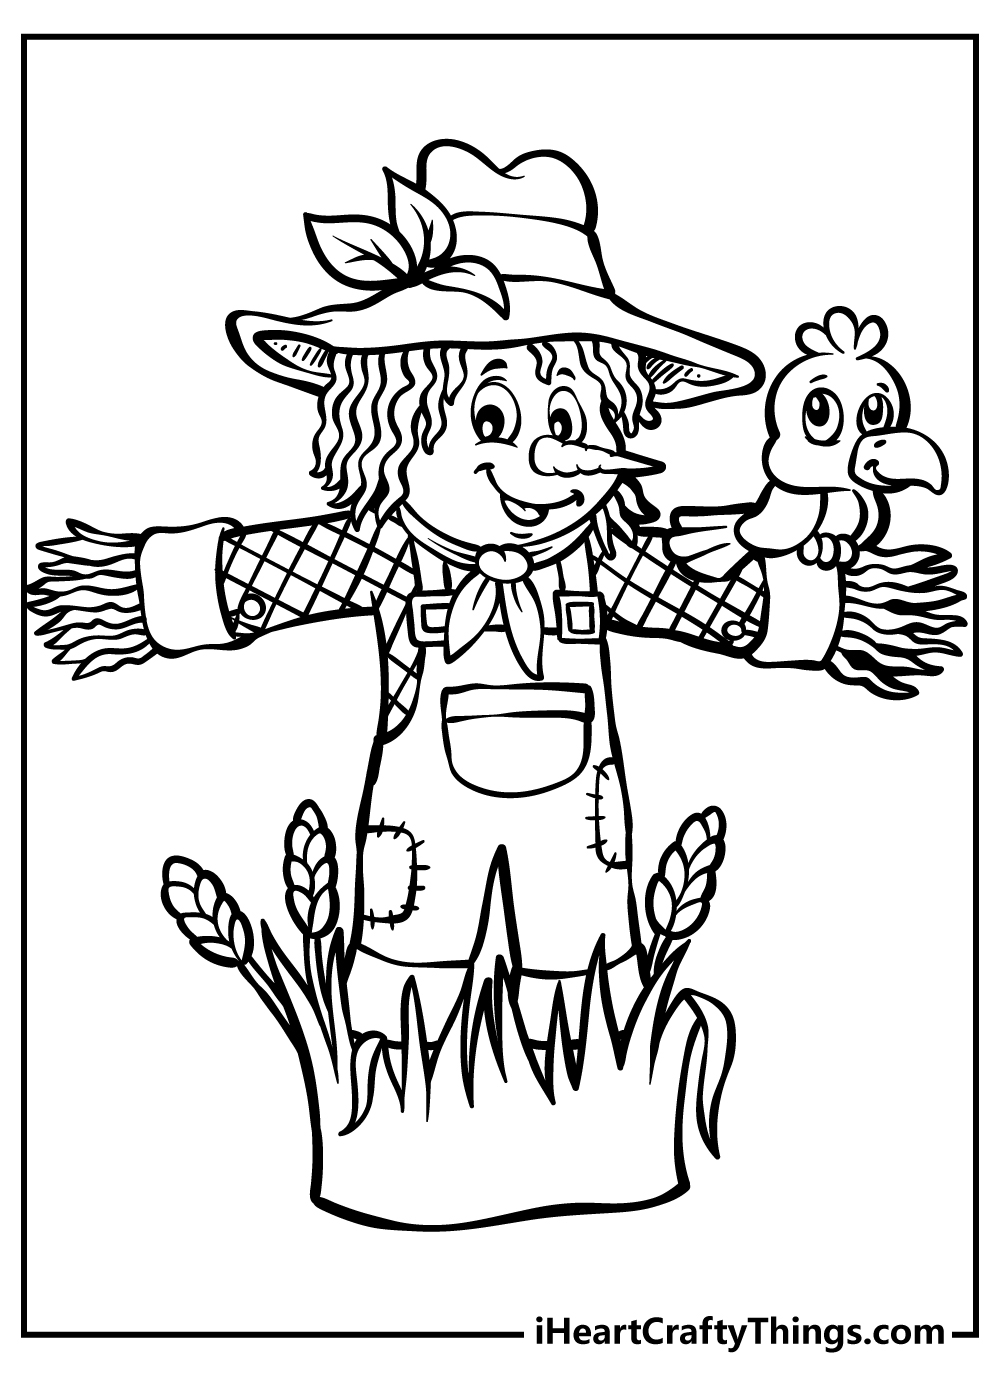 Halloween Coloring Book for adults free download